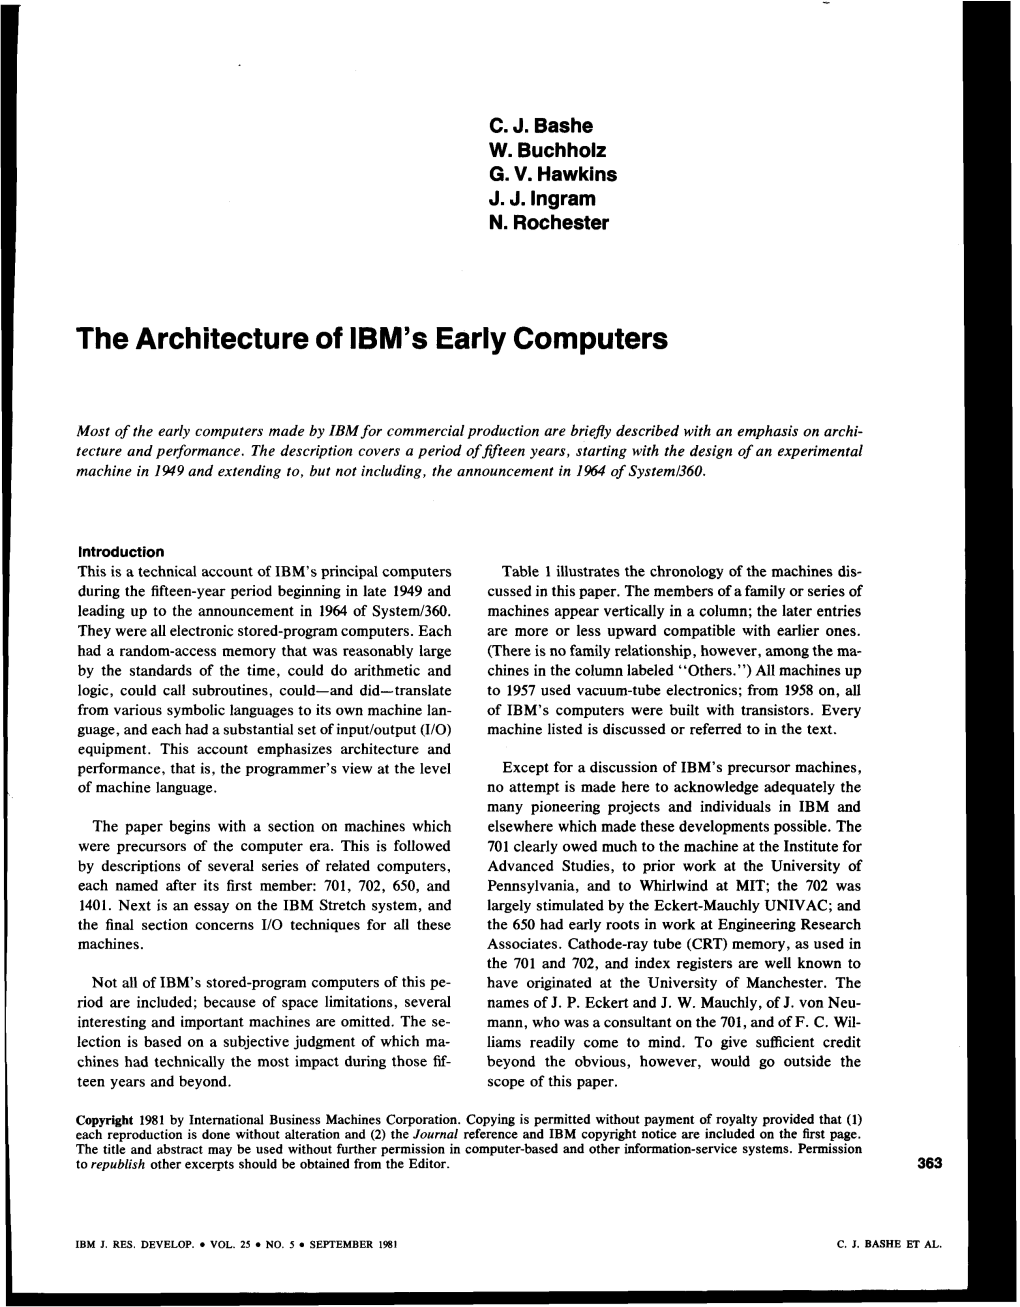 The Architecture of IBM's Early Computers